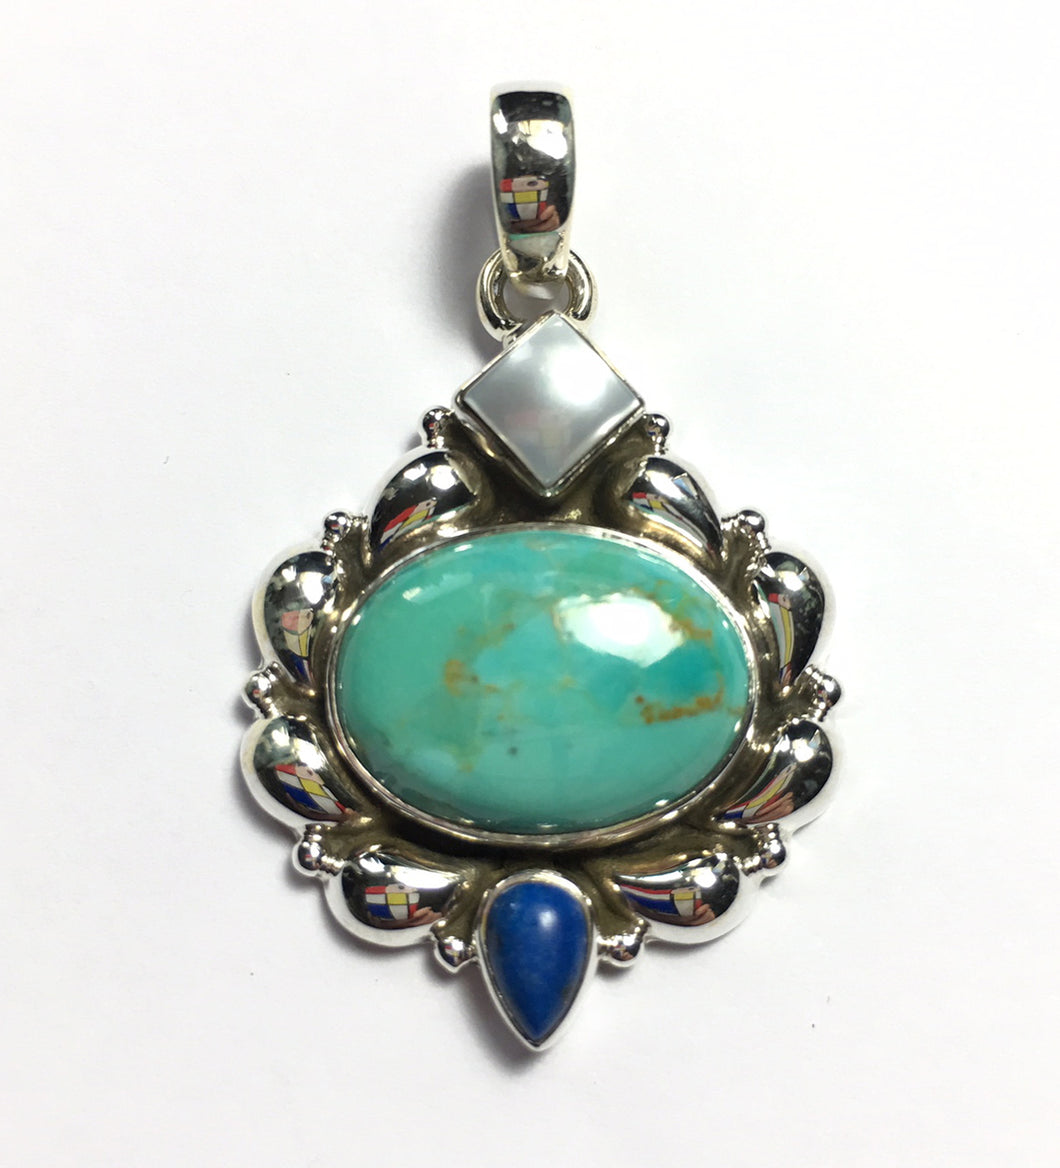 Turquoise Pendant with Lapis Lazuli Accent Silver Medallion